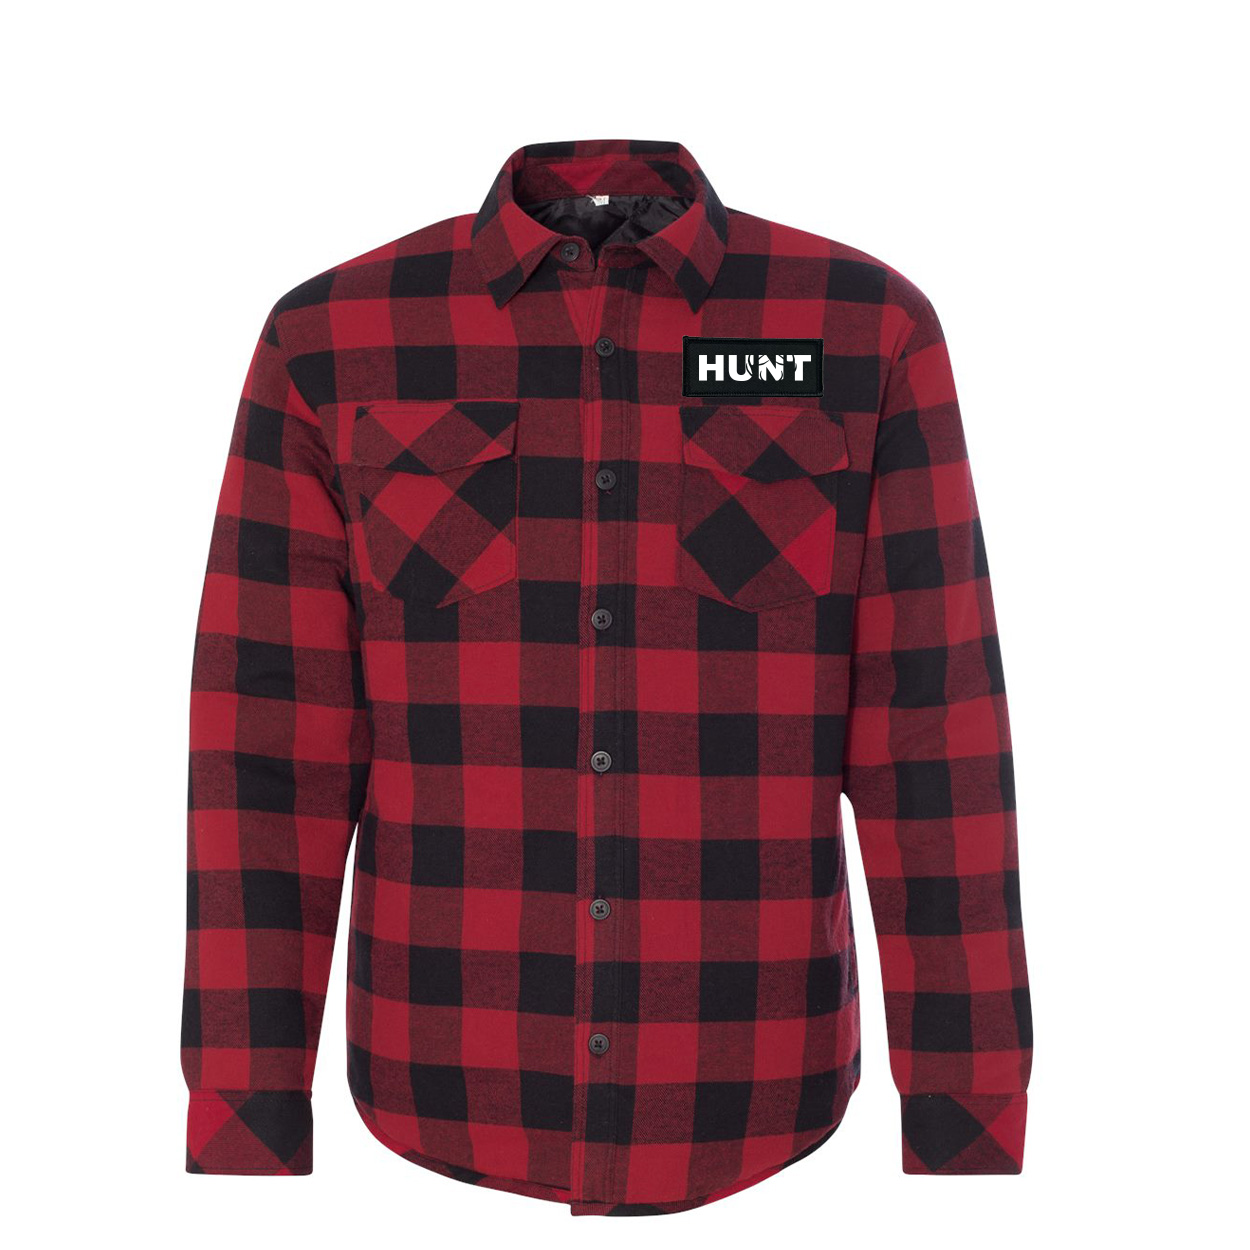 Hunt Rack Logo Classic Unisex Woven Patch Quilted Button Flannel Jacket Red/Black Buffalo (White Logo)